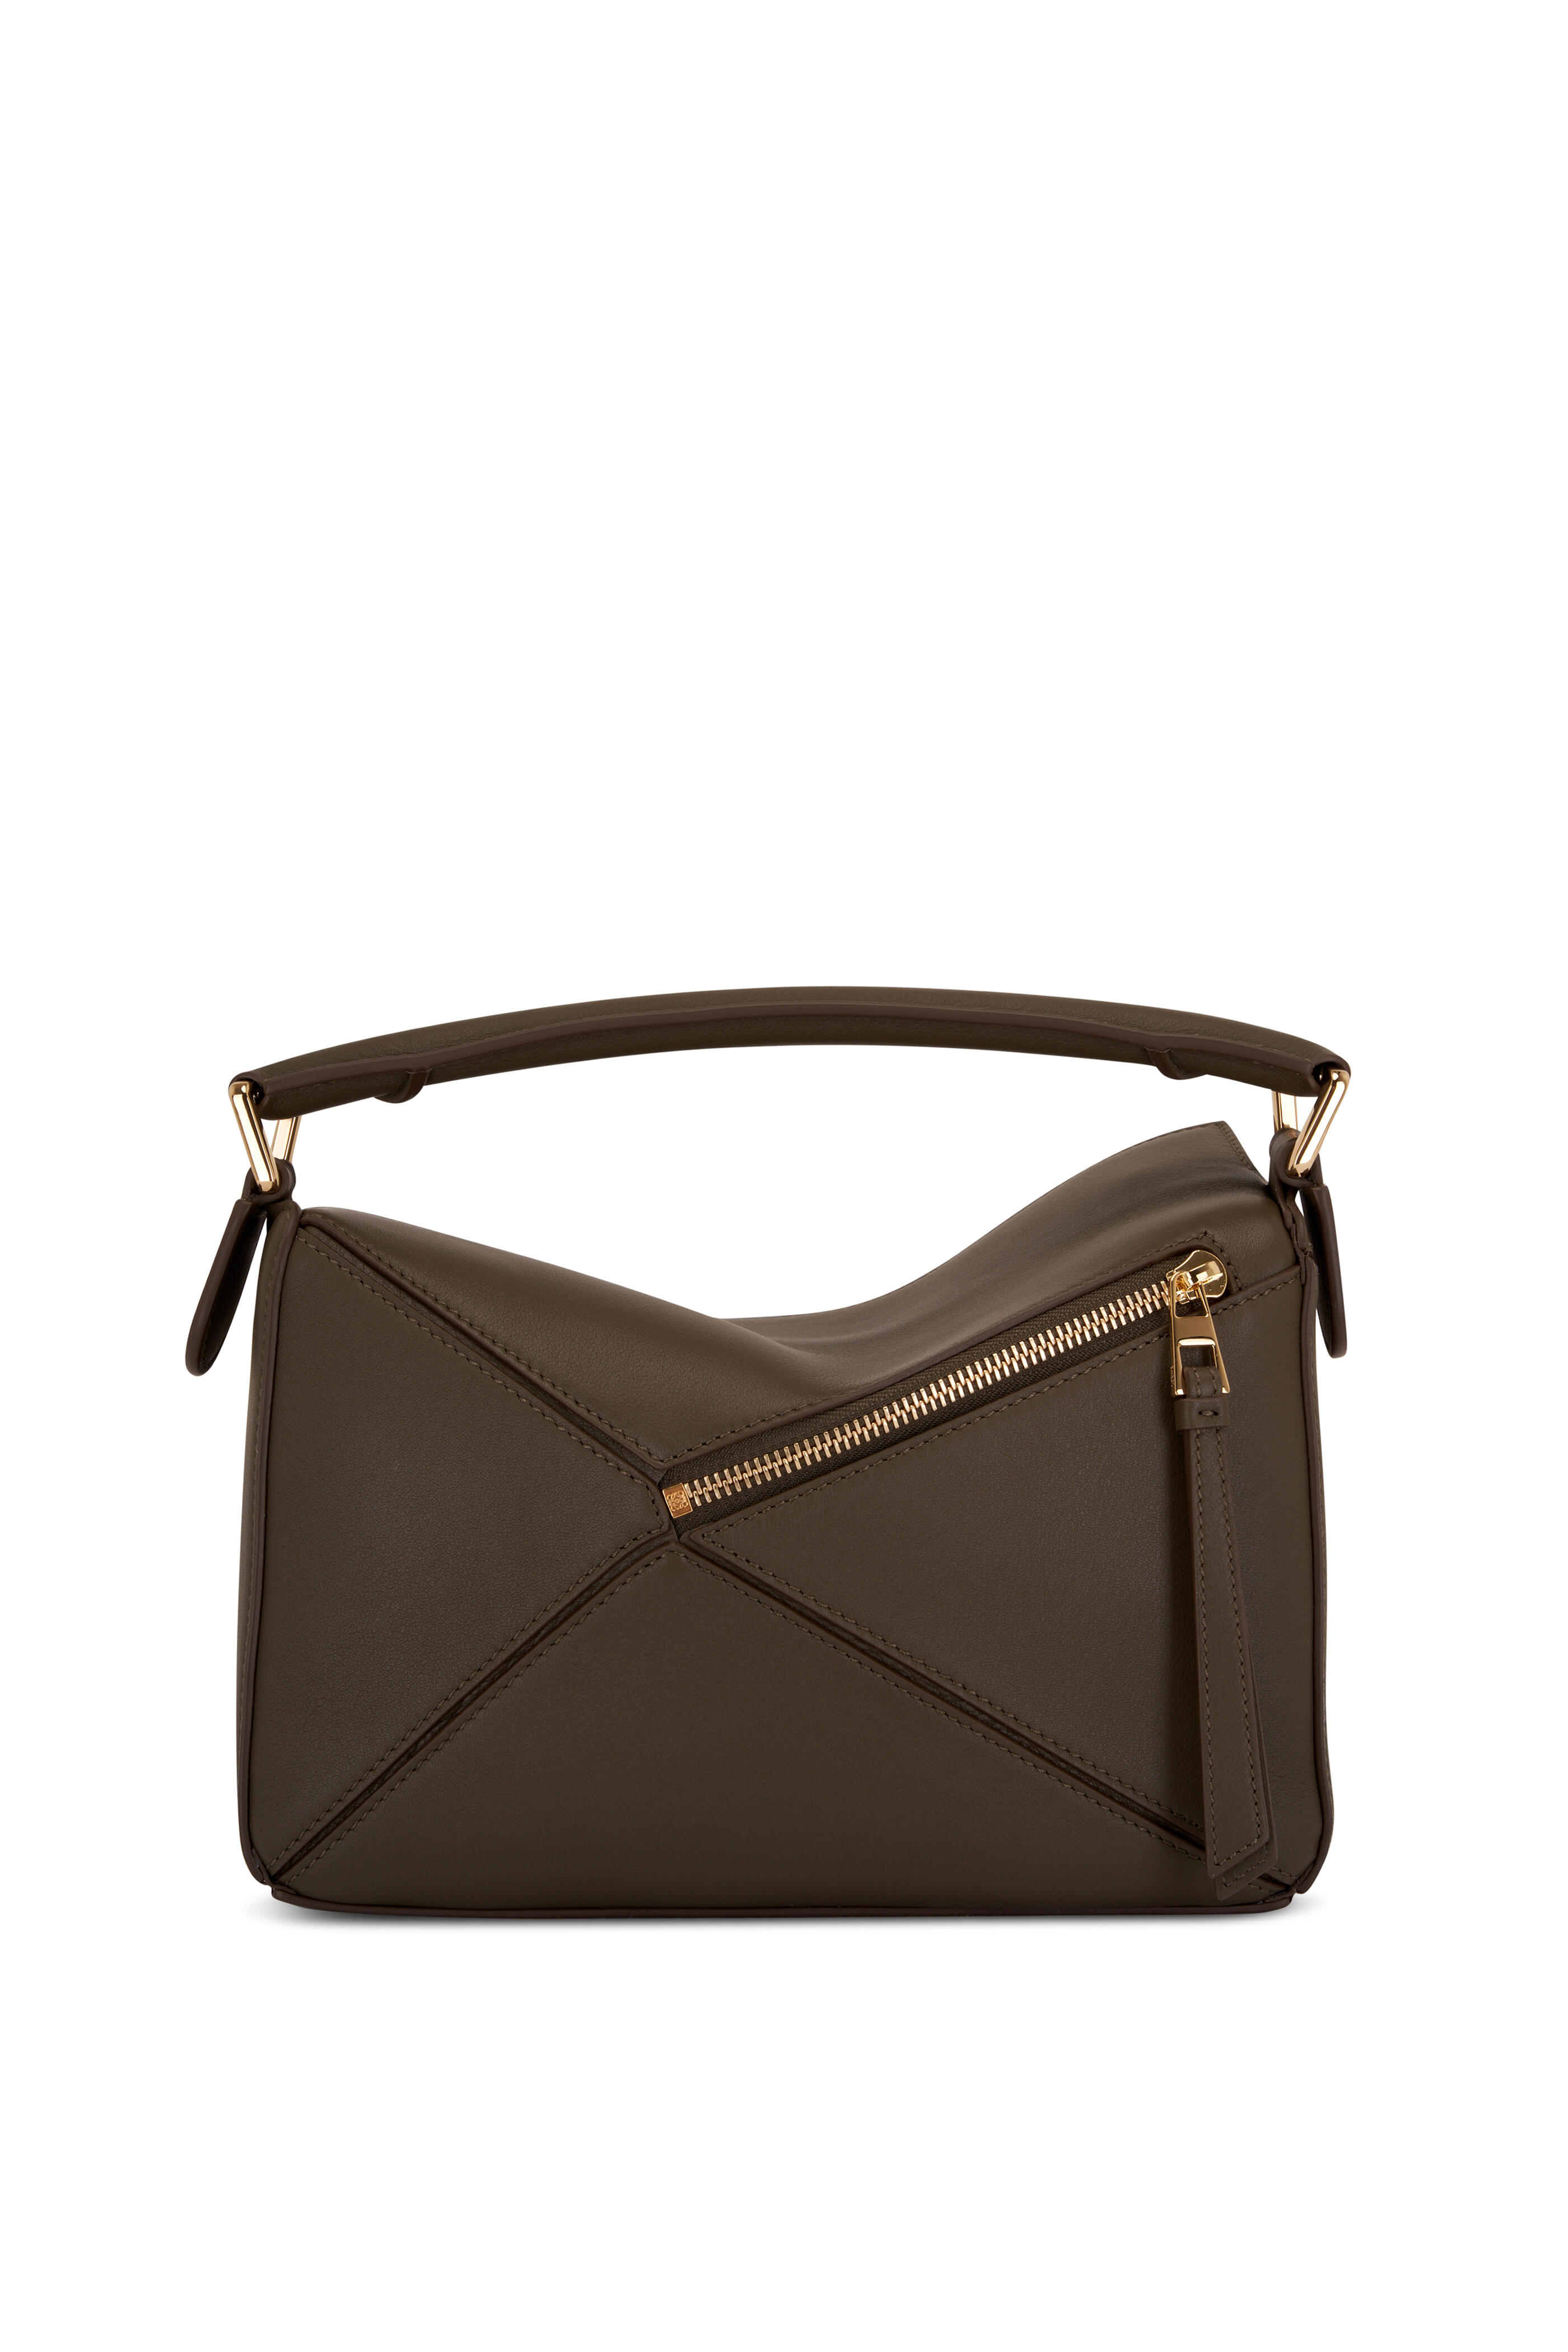 Loewe Puzzle Small Bag in Khaki Green & Soft White